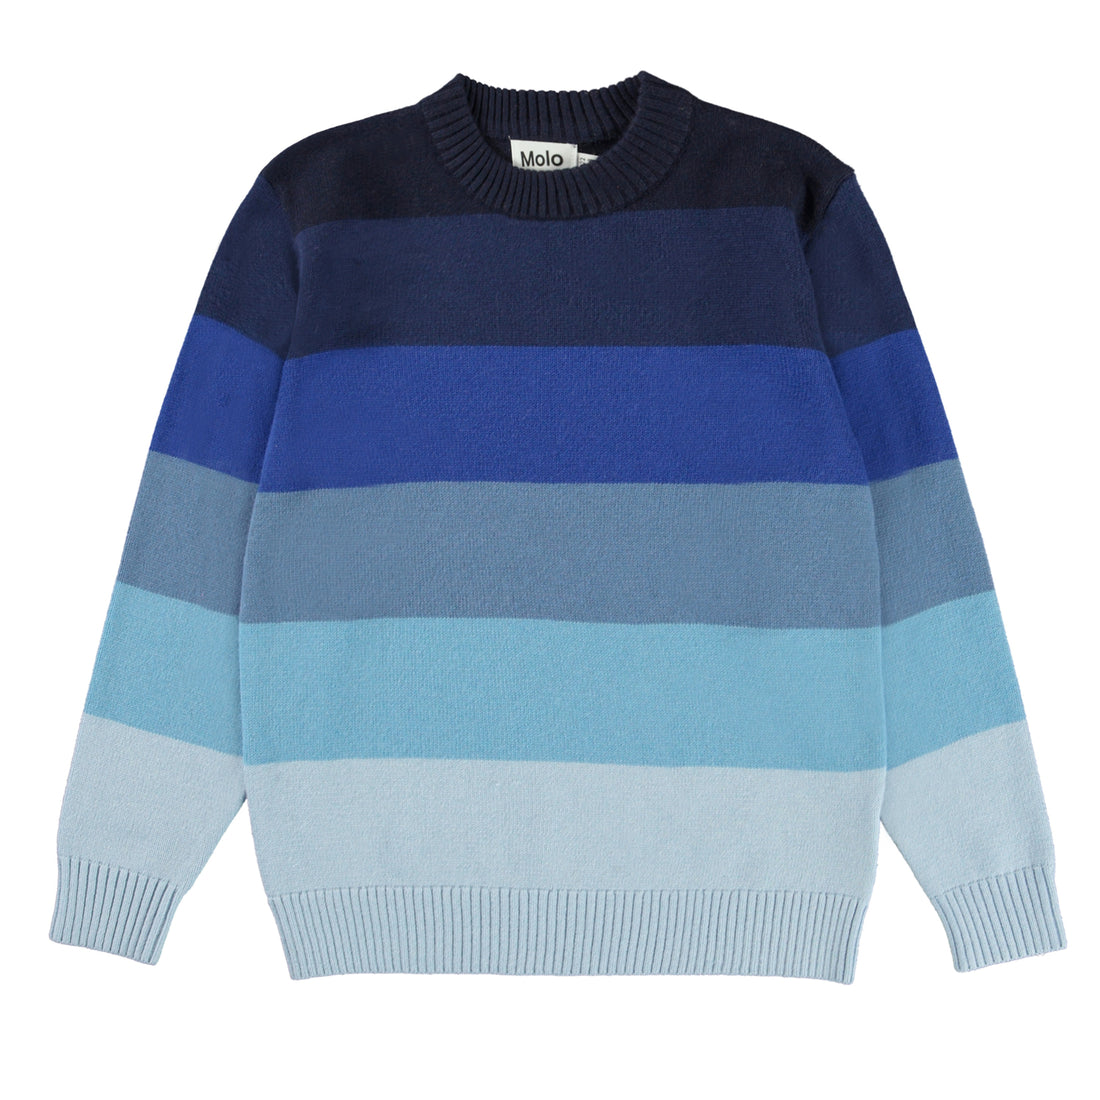 Molo Himmelrum Berge Sweater